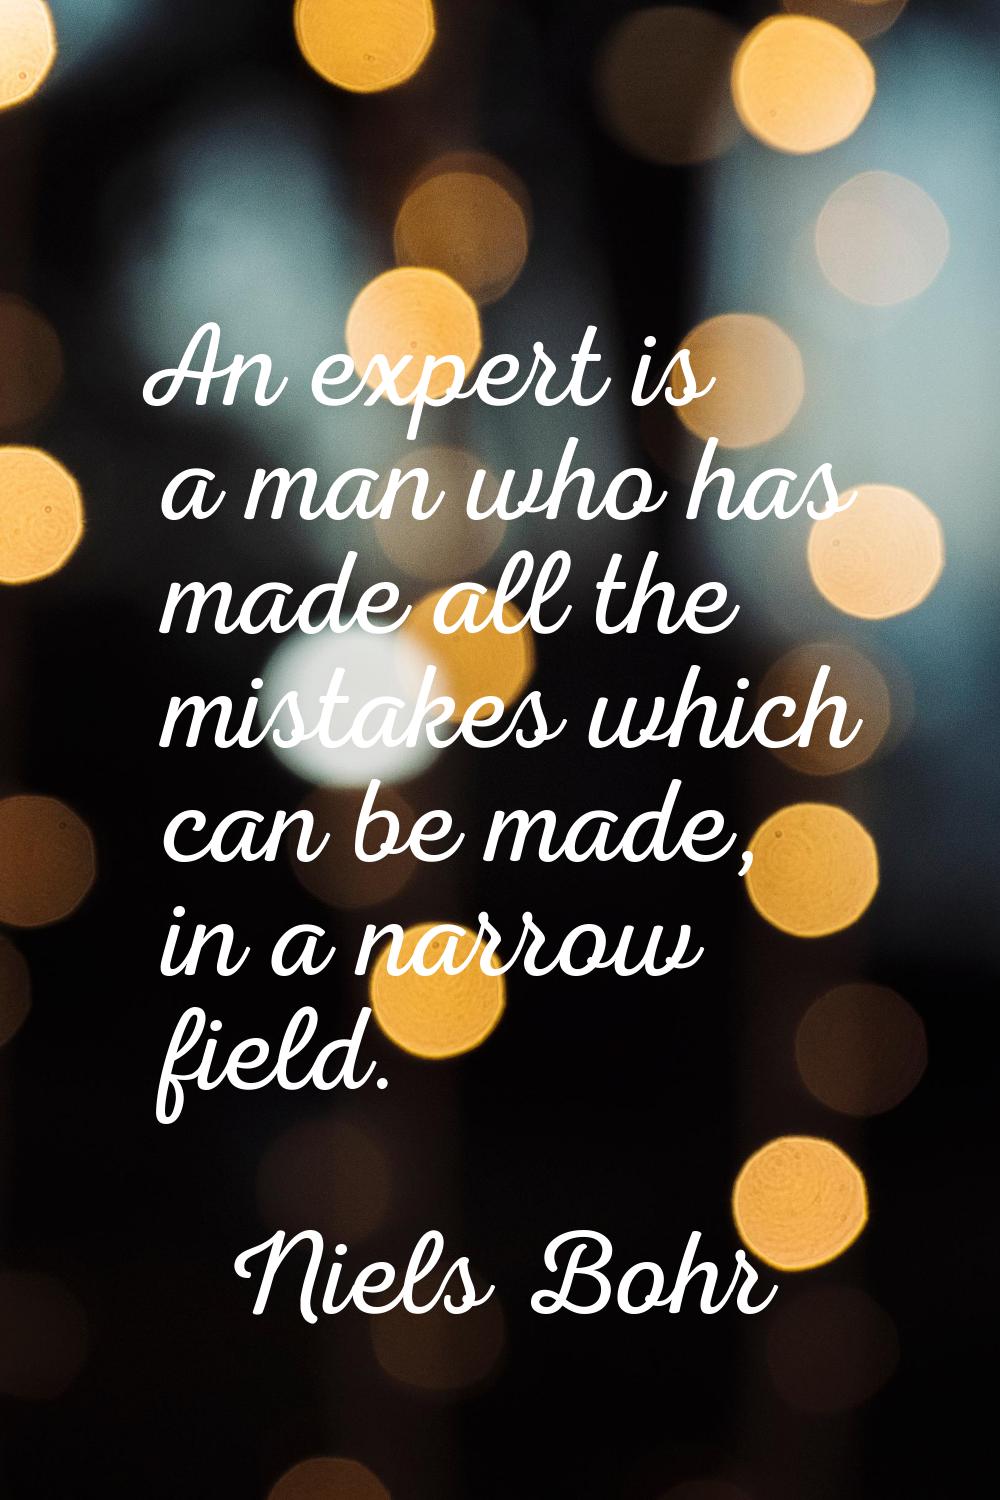 An expert is a man who has made all the mistakes which can be made, in a narrow field.